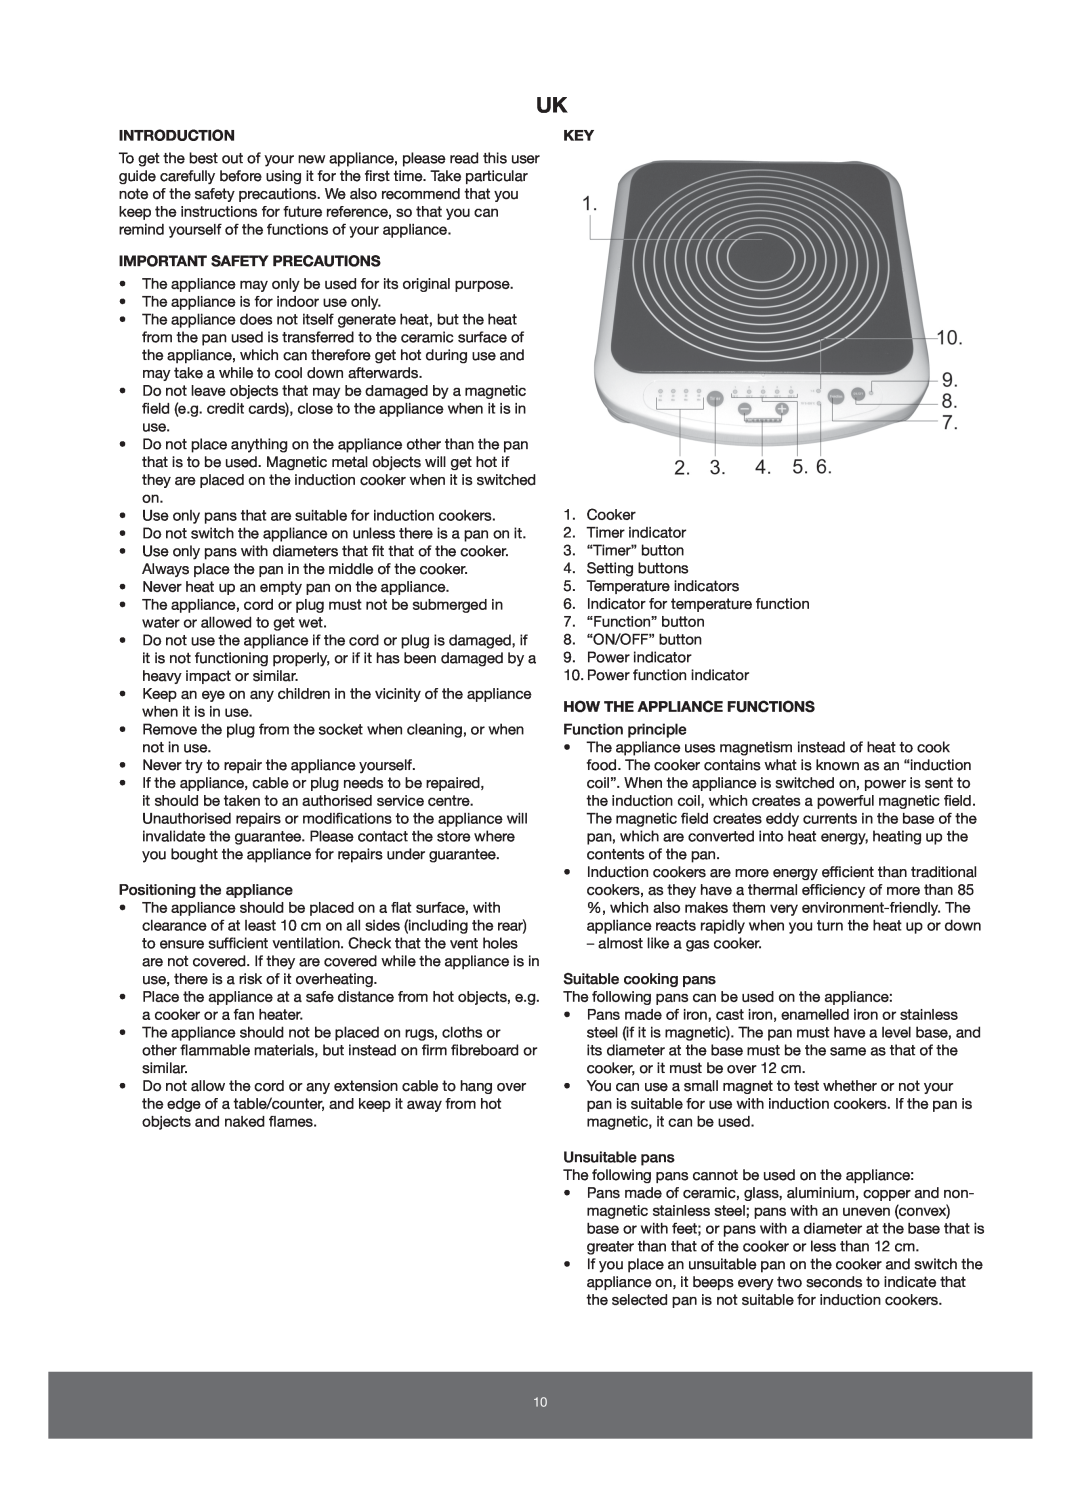 Melissa 650-005 manual Introduction, Important Safety Precautions, How The Appliance Functions 